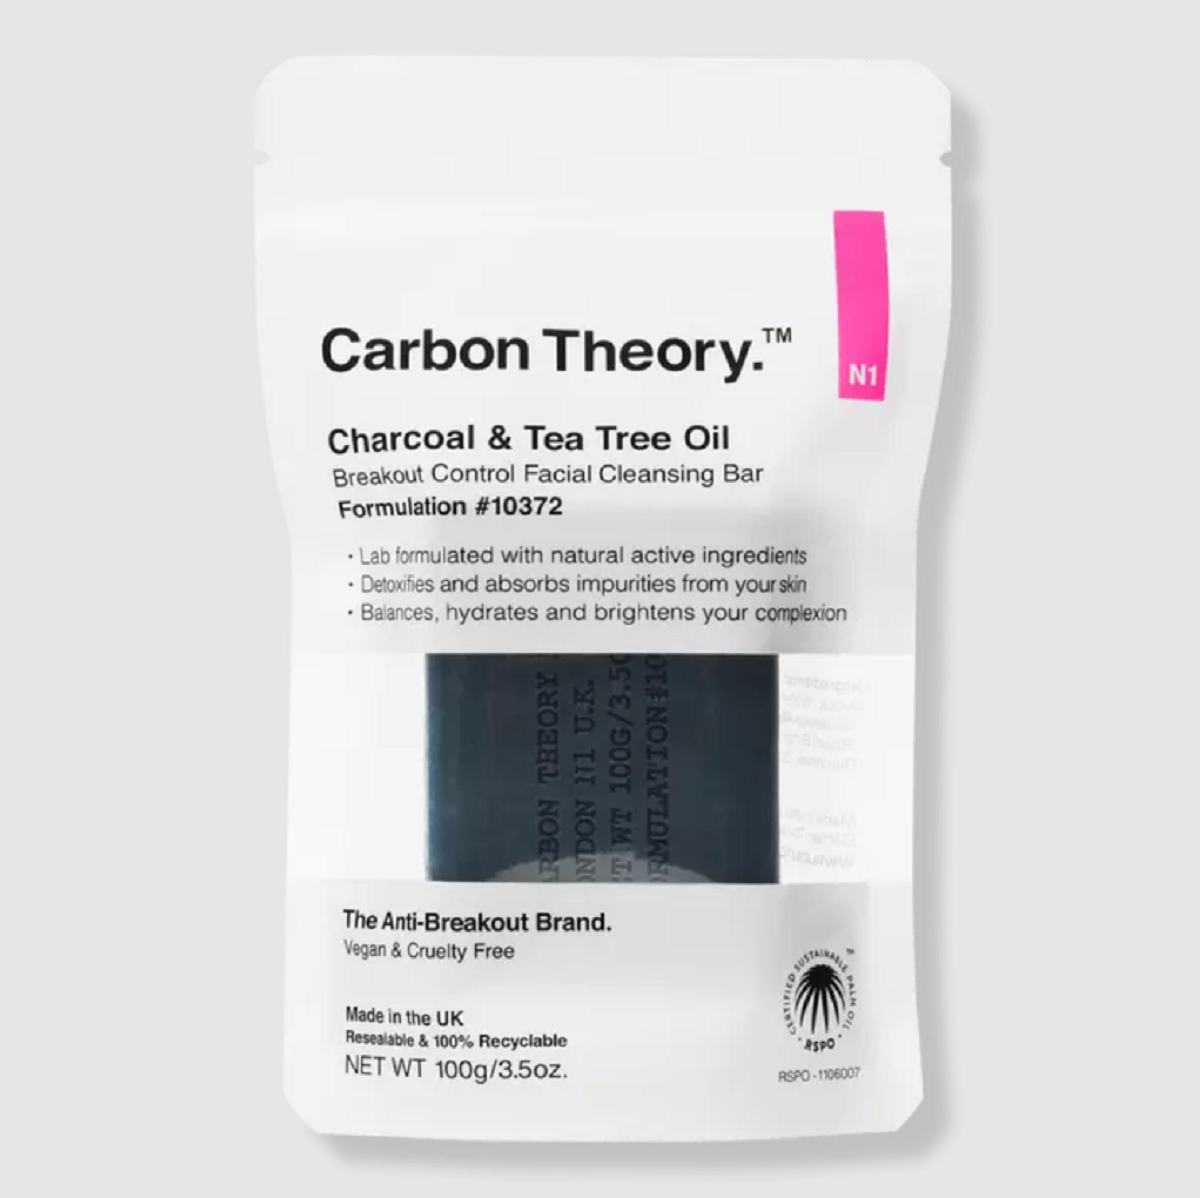 Carbon Theory Skincare Buy 1 Get 1 40% Off at Ulta Beauty